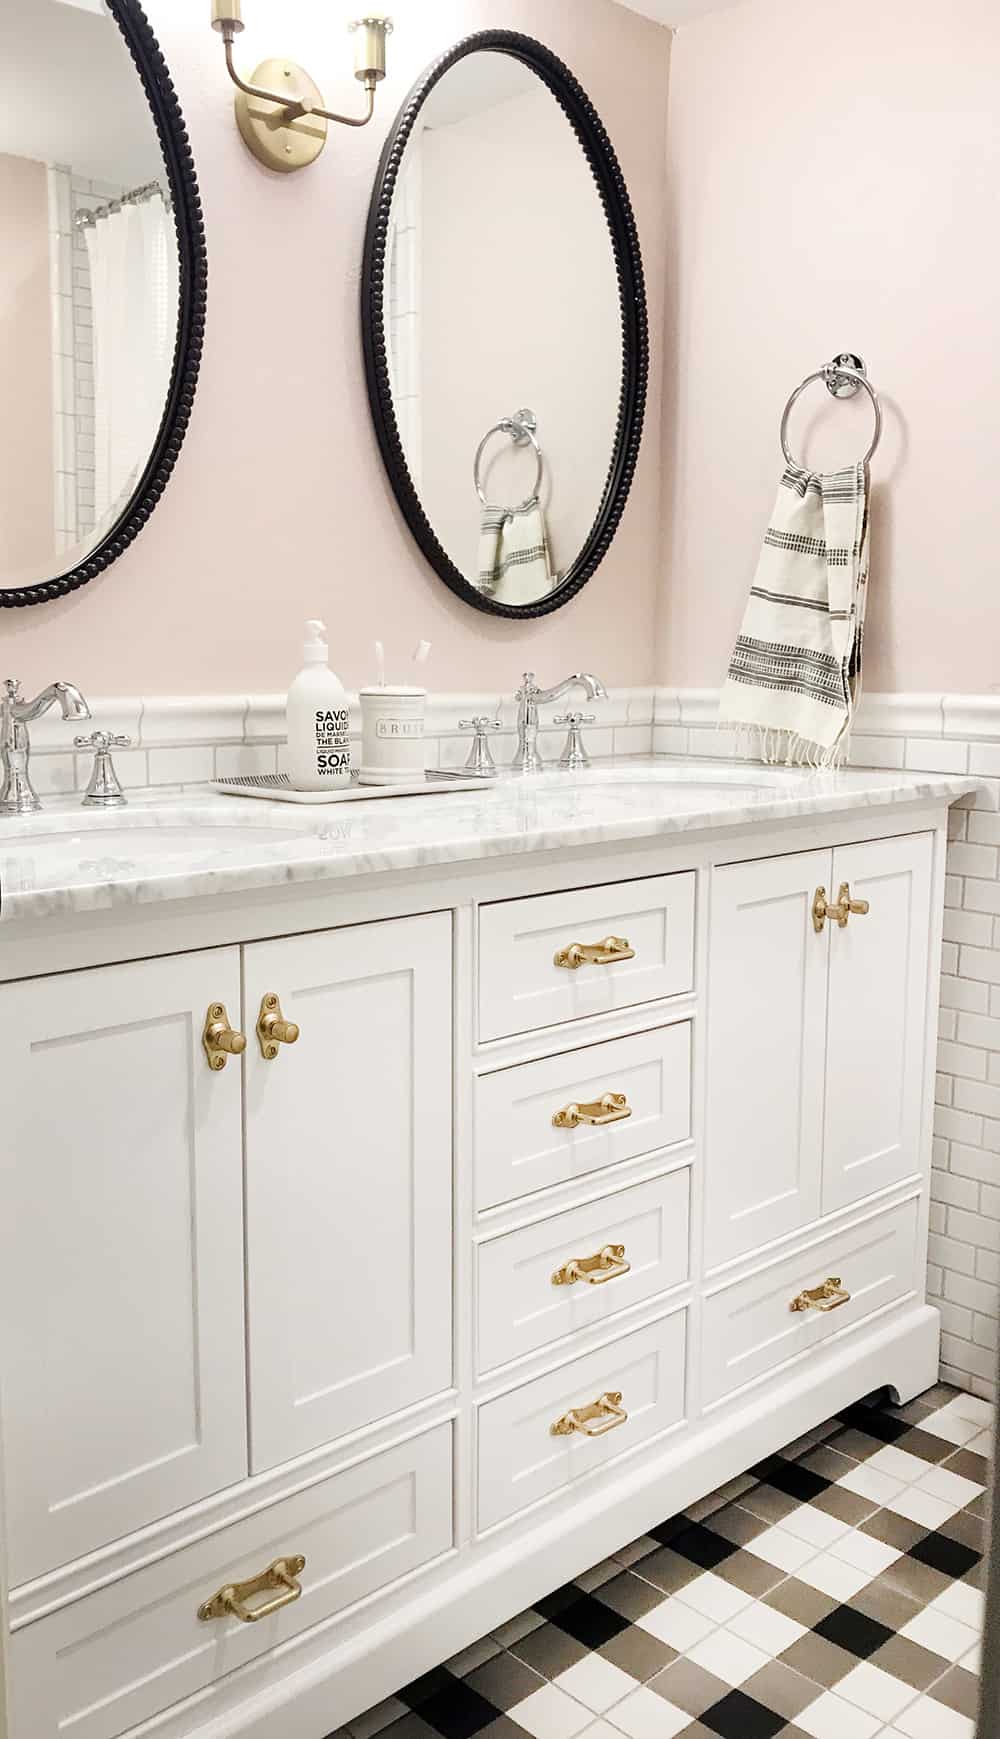 A modern vintage bathroom with white dual sink vanity, white cabinets with gold handles, and white marble countertops. The walls are half white subway tiles, and half painted a light blush pink. Two metal framed oval mirrors hang above each sink.